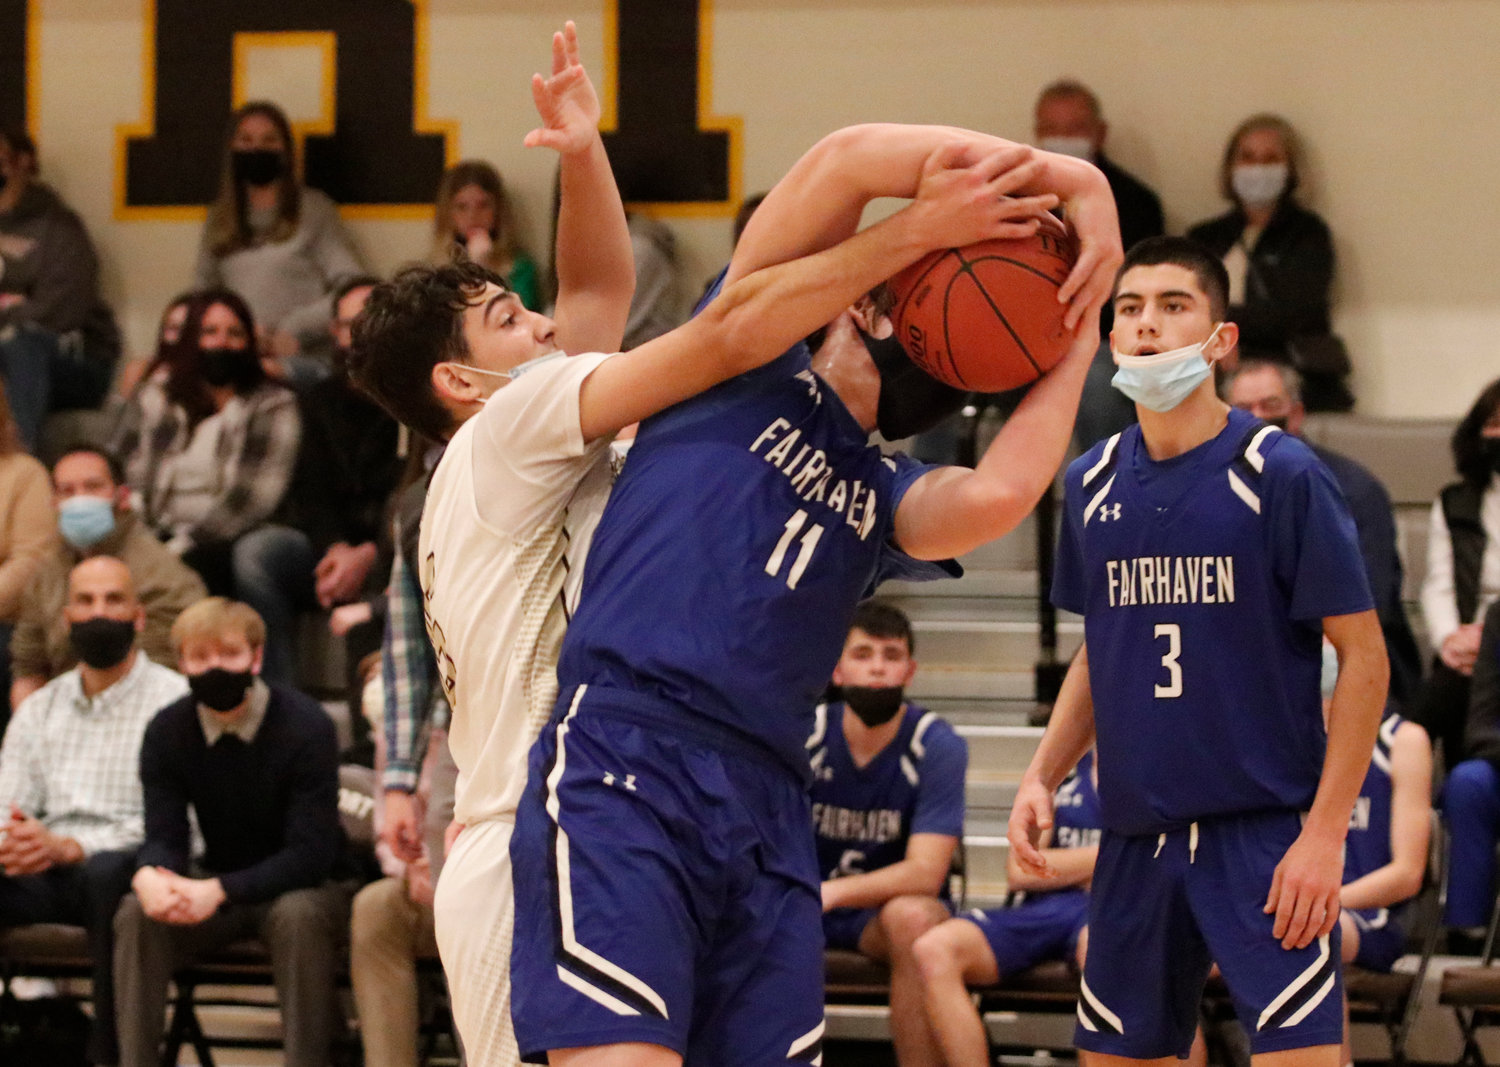 Dom Vitorino reaches in to grab the ball away from a Blue Devil.